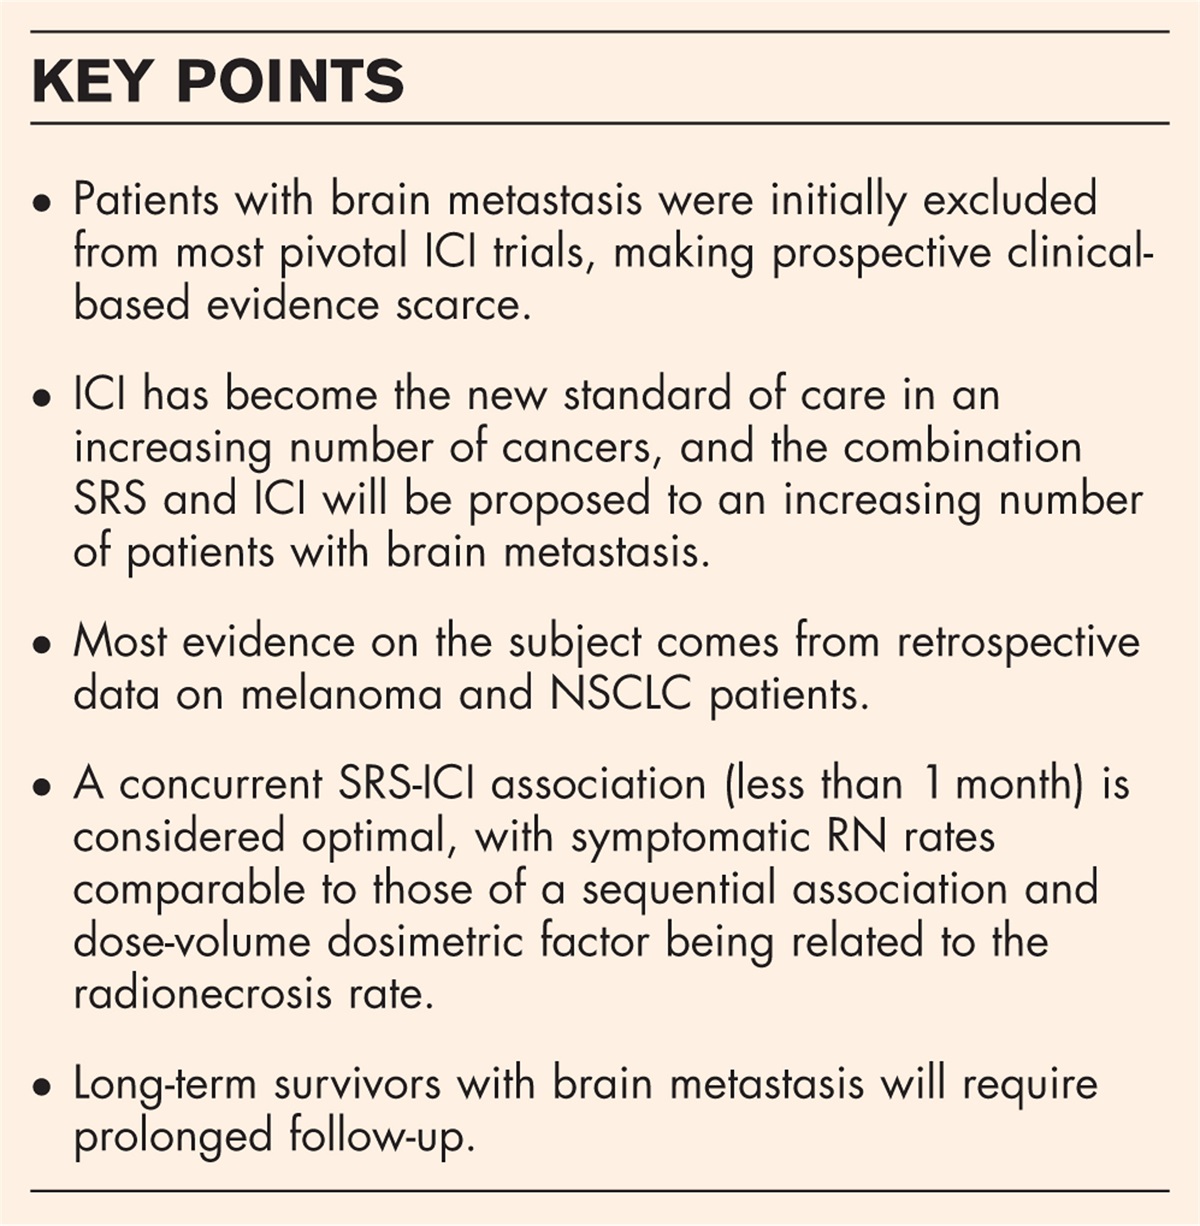 Combination of radiosurgery and immunotherapy in brain metastases: balance between efficacy and toxicities